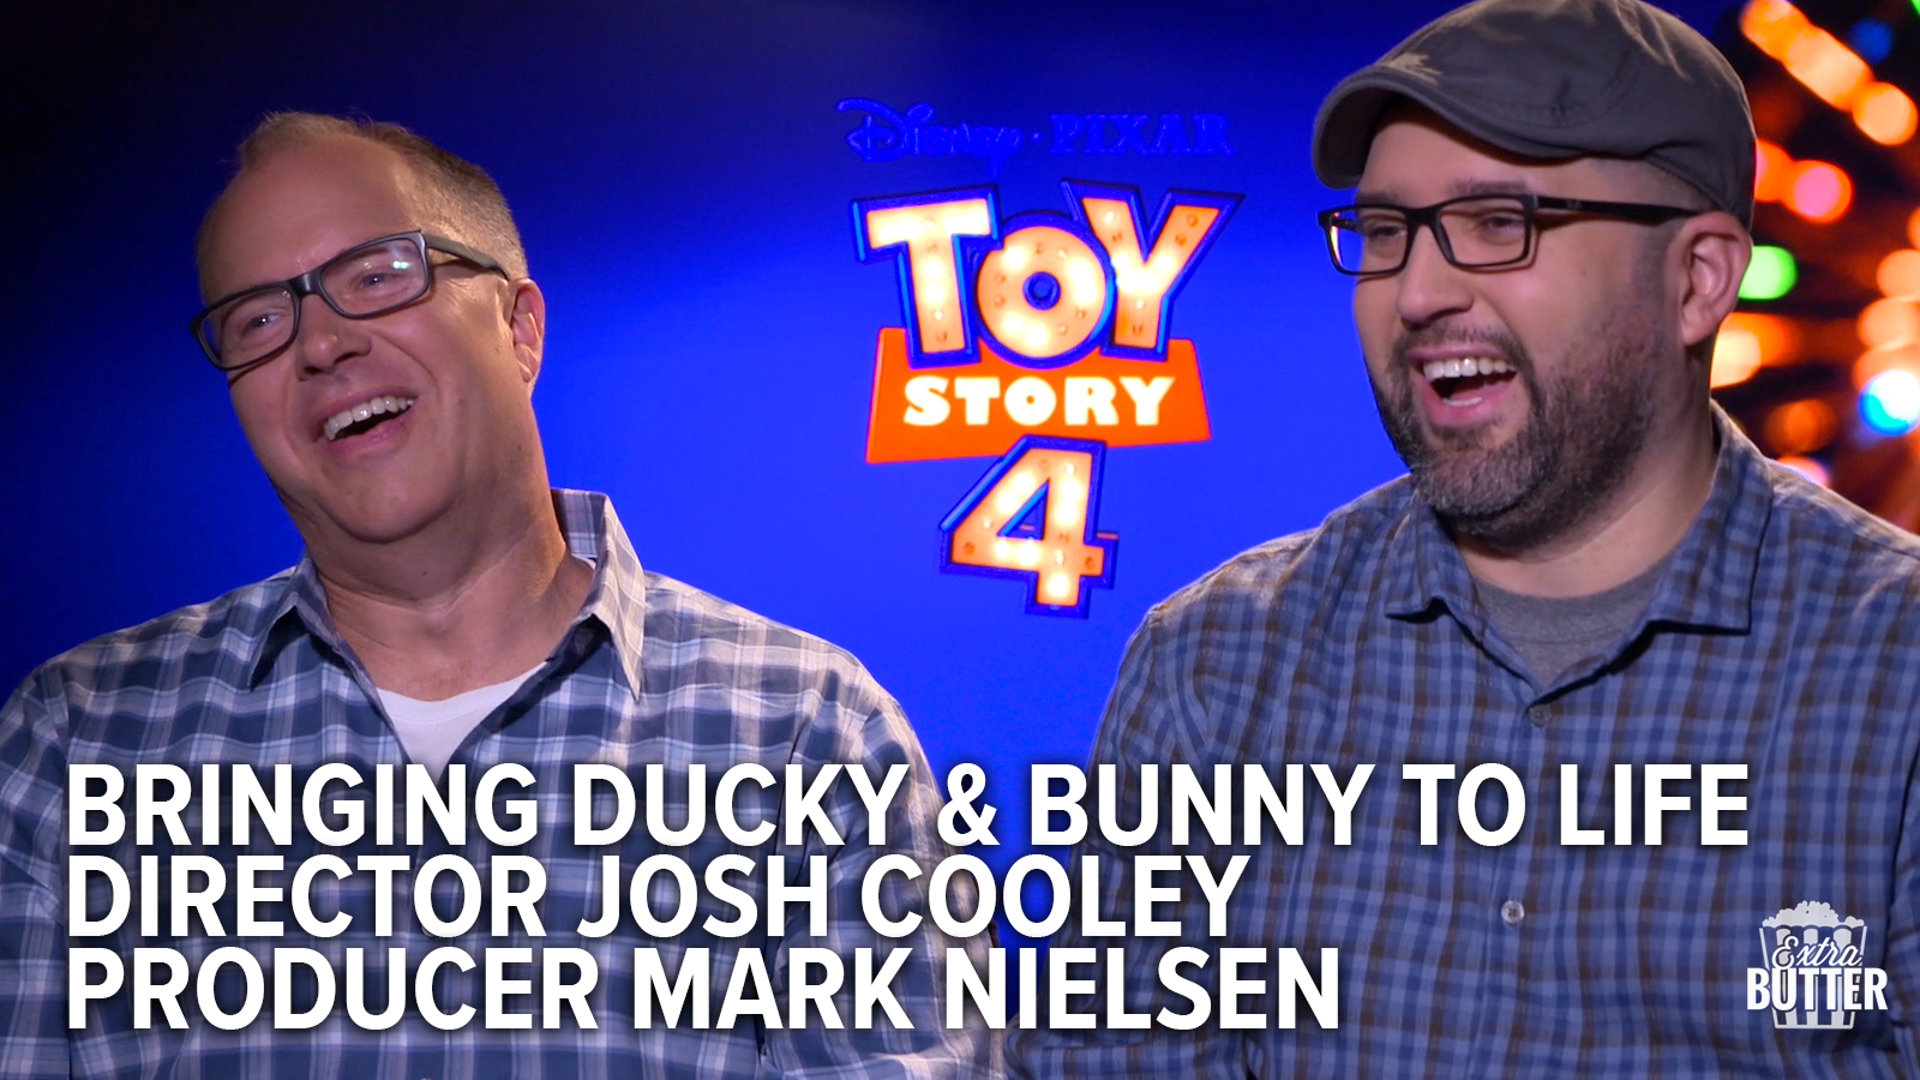 'Toy Story 4' director Josh Cooley and producer Mark Nielsen talk about creating the new characters Ducky and Bunny and taking over the 'Toy Story' franchise.